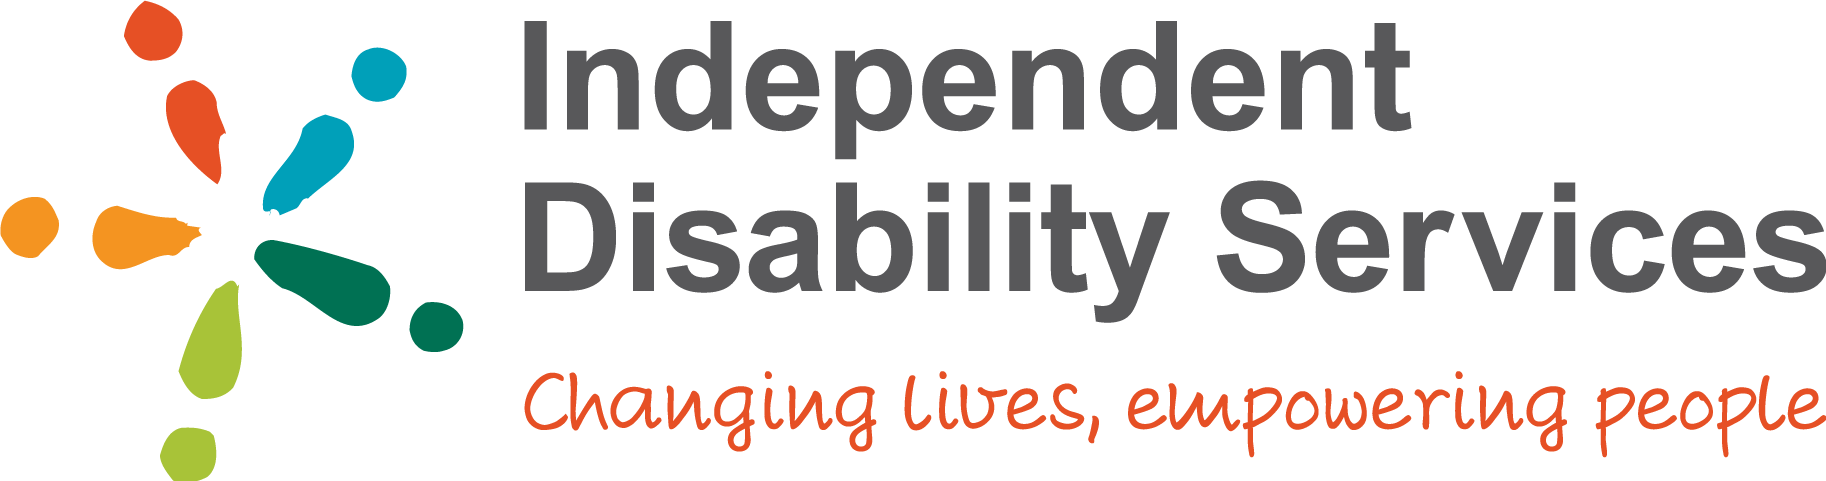 Independent Disability Services